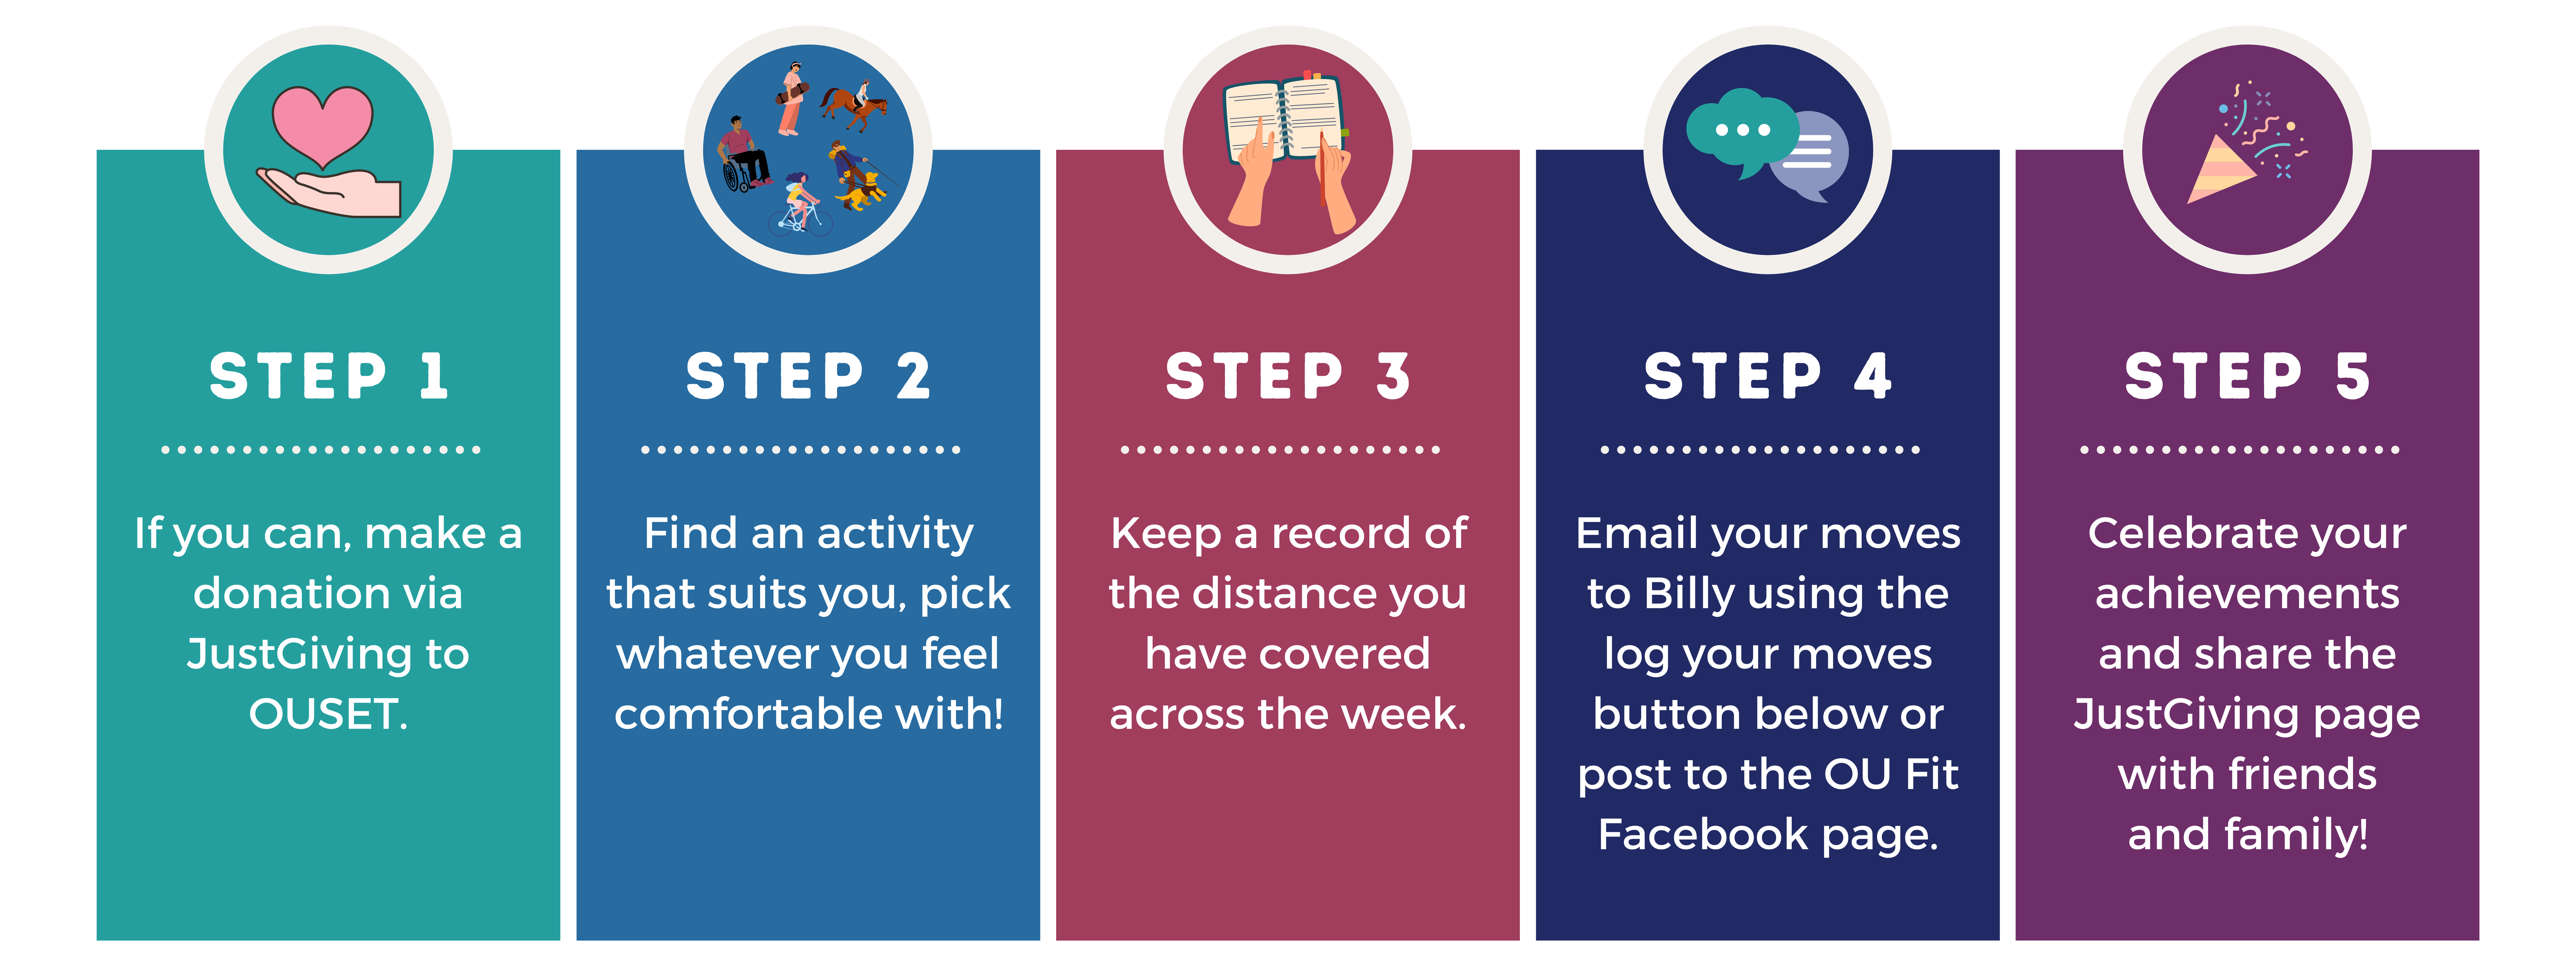 infographic explaining how to participate. 1. If you can, make a donation via JustGiving to OUSET. 2. Find an activity that suits you, pick whatever you feel comfortable with! 3.Keep a record of the distance you have covered across the week. 4. Email your moves to Billy using the log your moves button below or post to the OU Fit Facebook page. 5. Celebrate your achievements and share the JustGiving page with friends and family!